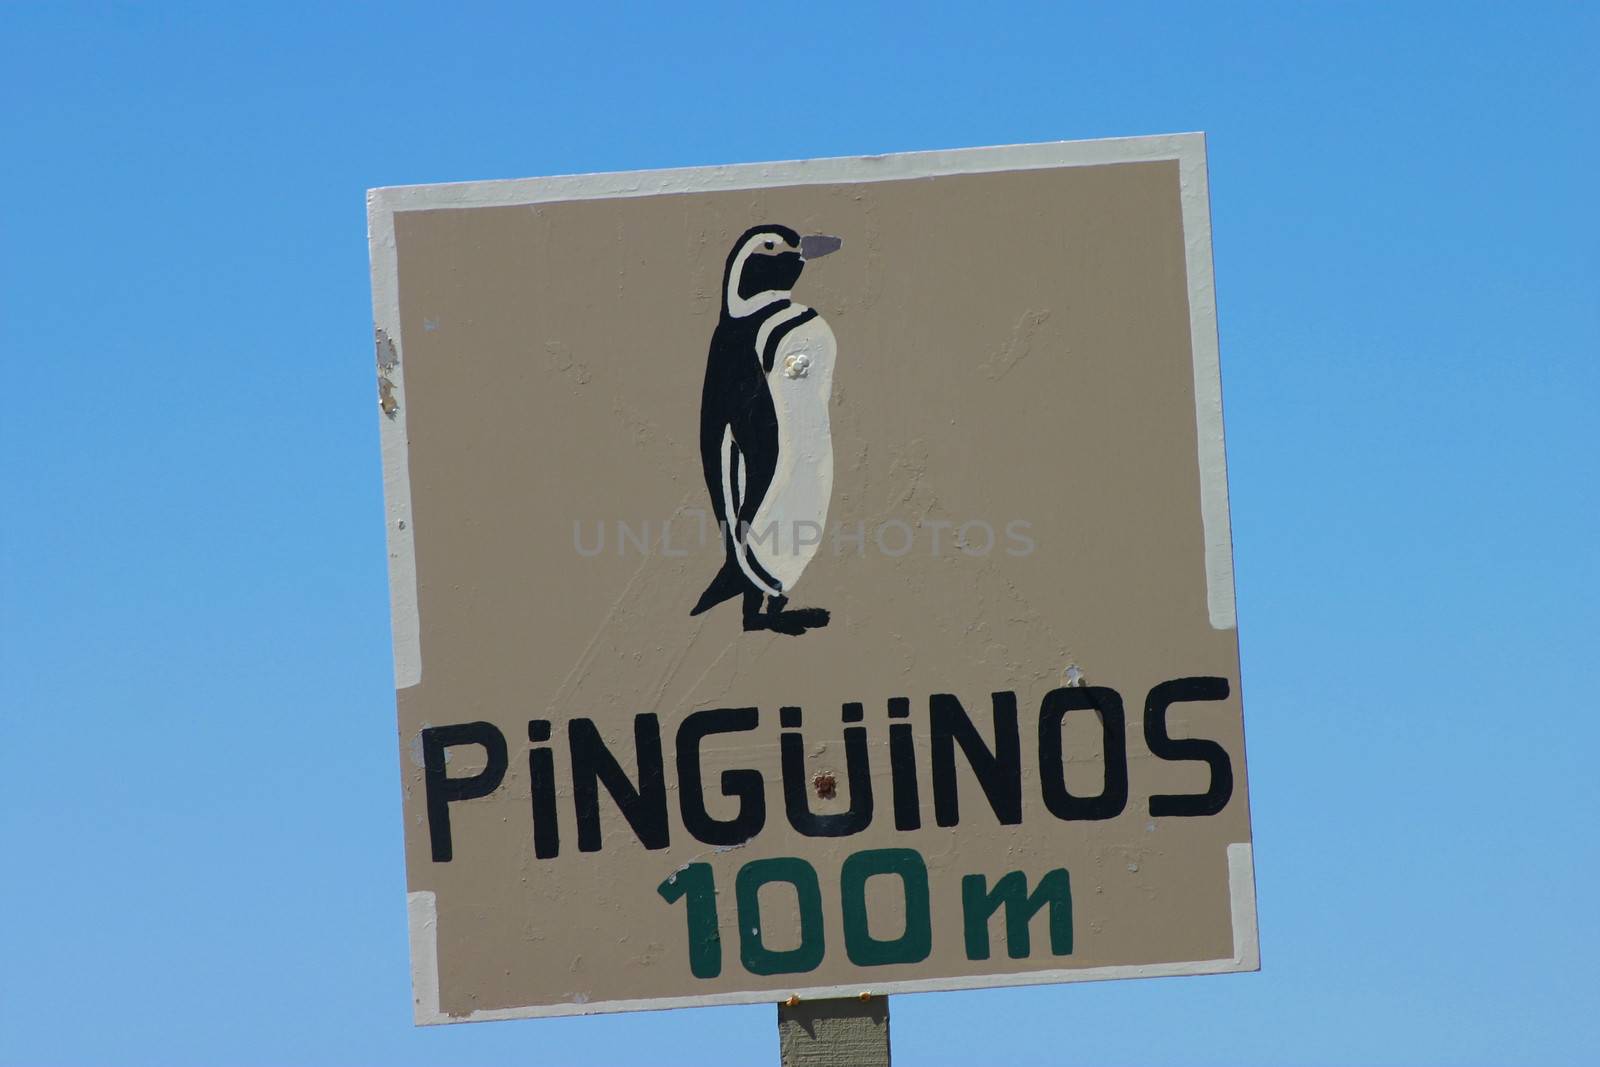 Wildlife warning in Argentina. Caution, penguins crossing in Patagonia, The Valdes Peninsula.